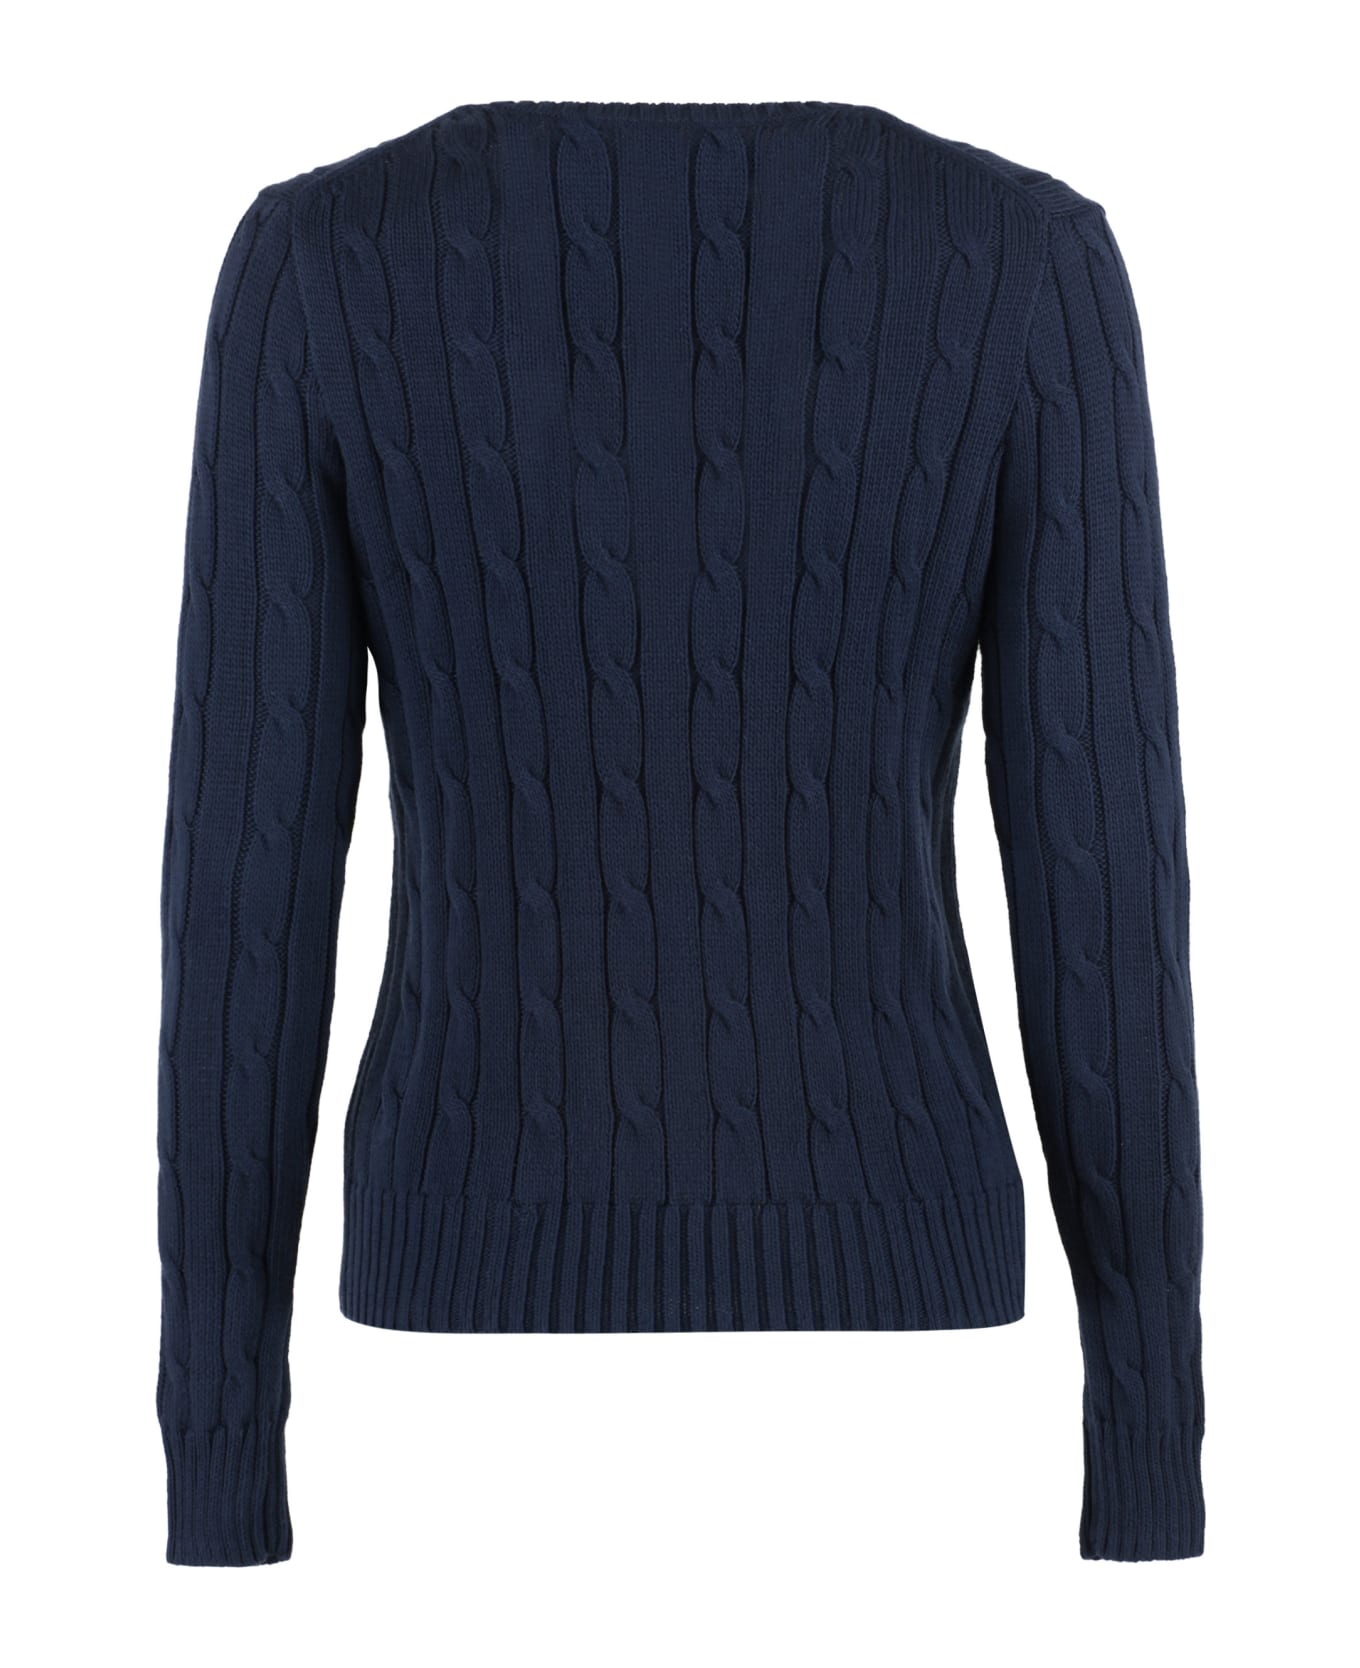 Polo Ralph Lauren Cable Knit Sweater - Blue ニットウェア